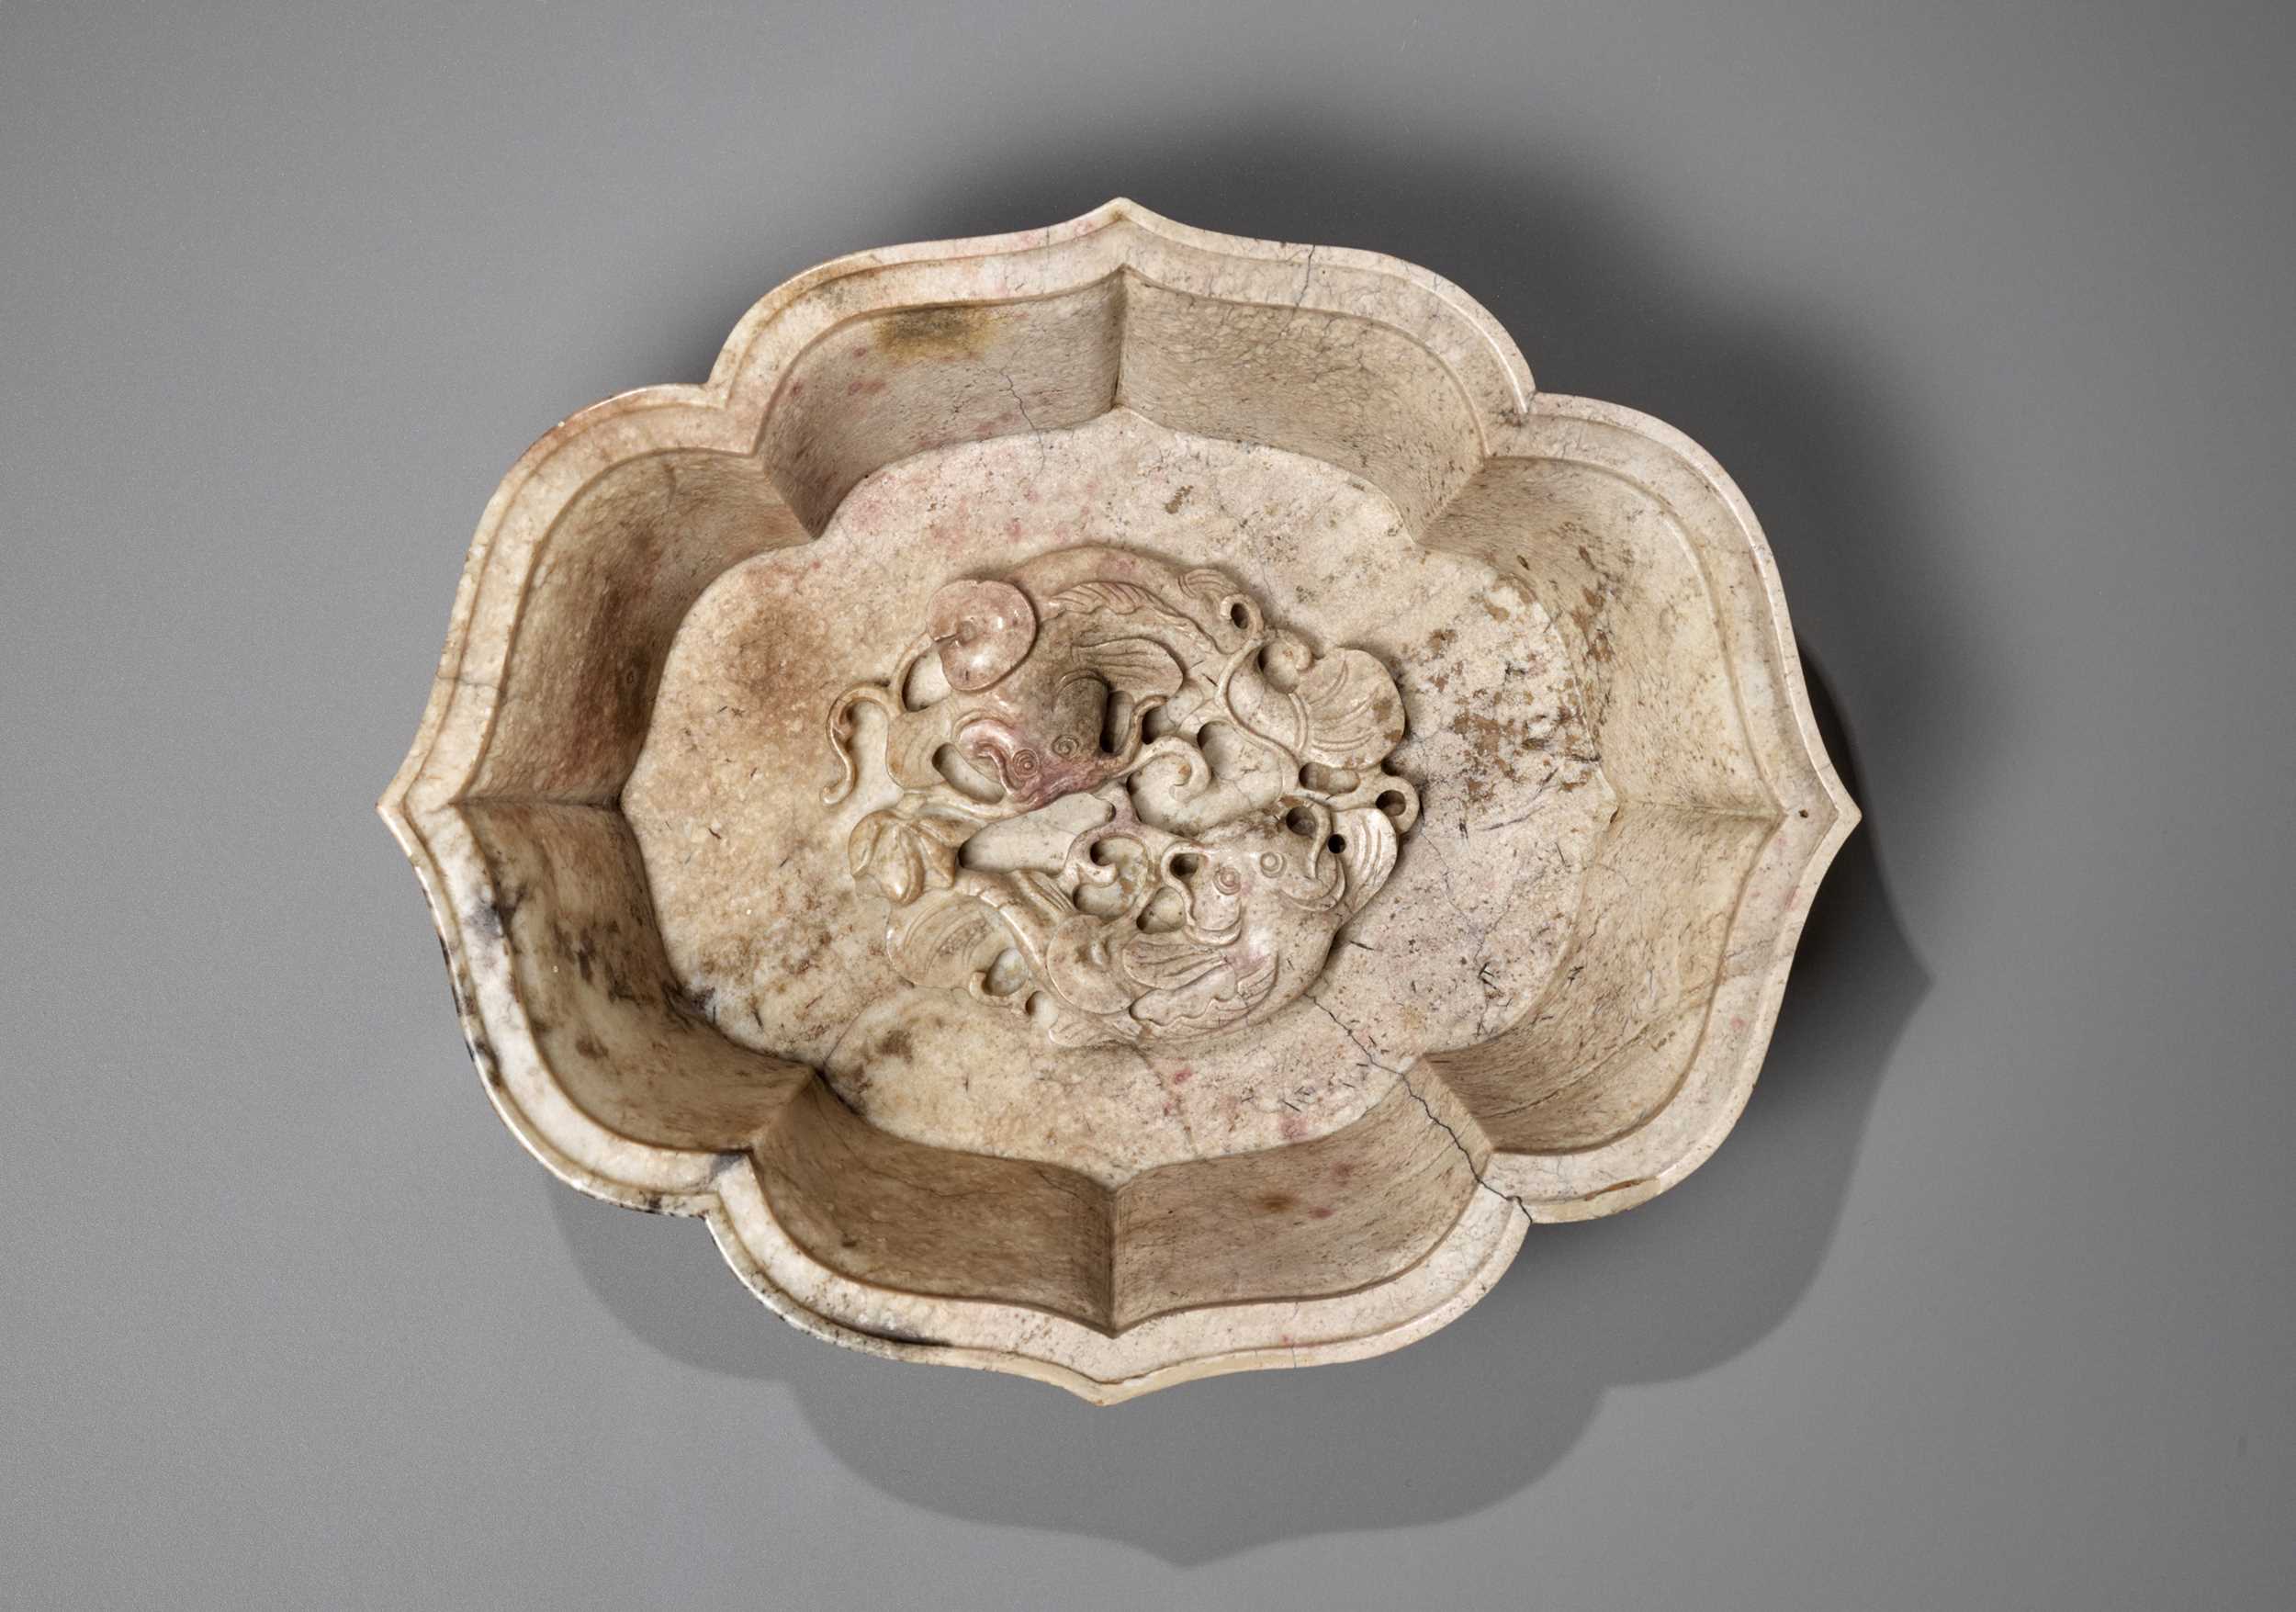 A CHICKEN BONE JADE ‘DOUBLE FISH’ MARRIAGE BOWL, 17TH-18TH CENTURY